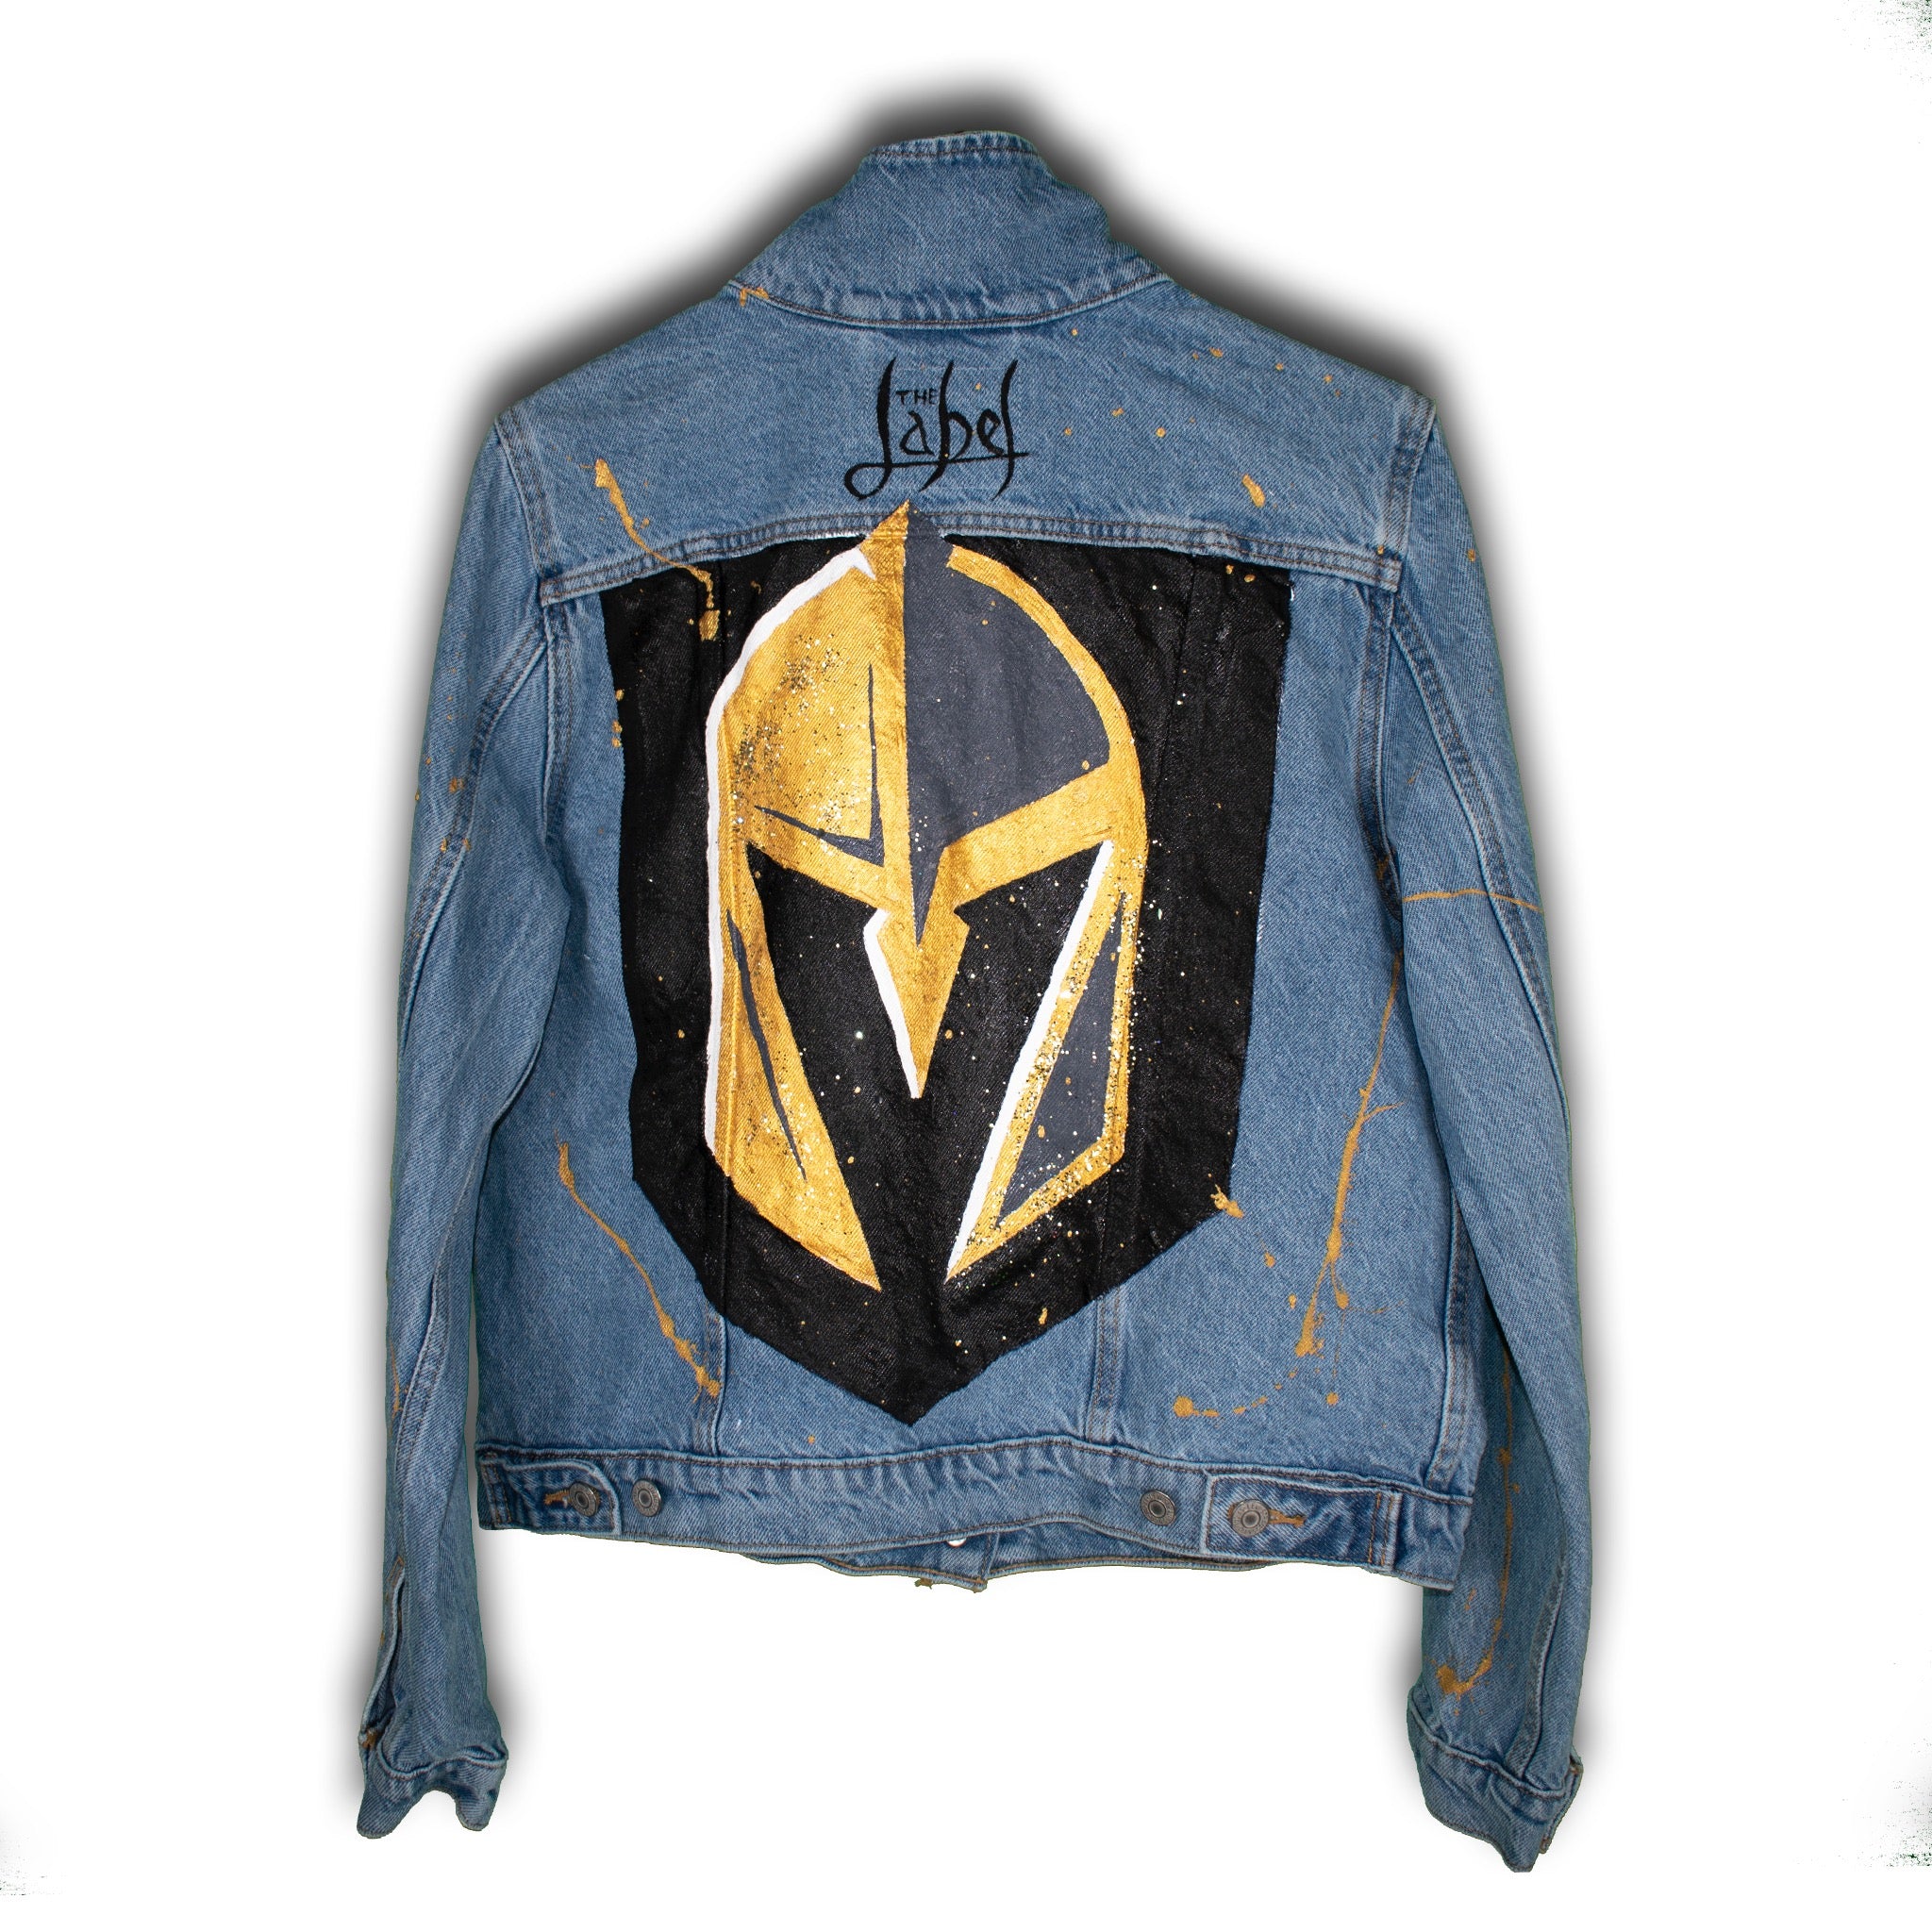 Jackets & Coats, Vegas Golden Knights Custom Denim Jacket With Patches  Inaugural Season Size M